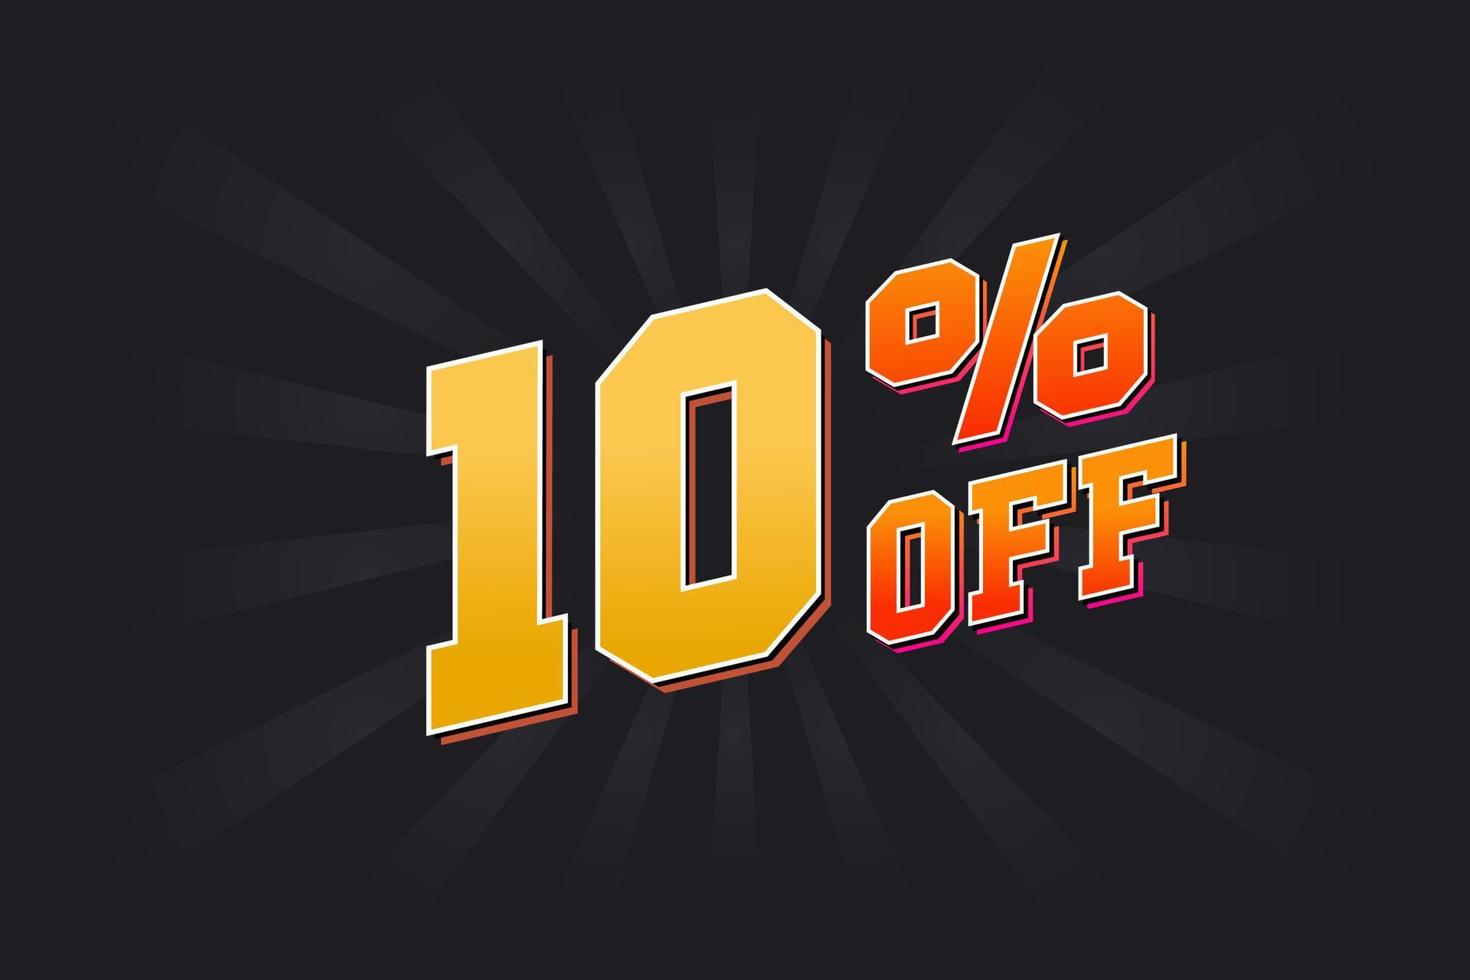 10 Percent off Special Discount Offer. 10 off Sale of advertising campaign vector graphics.